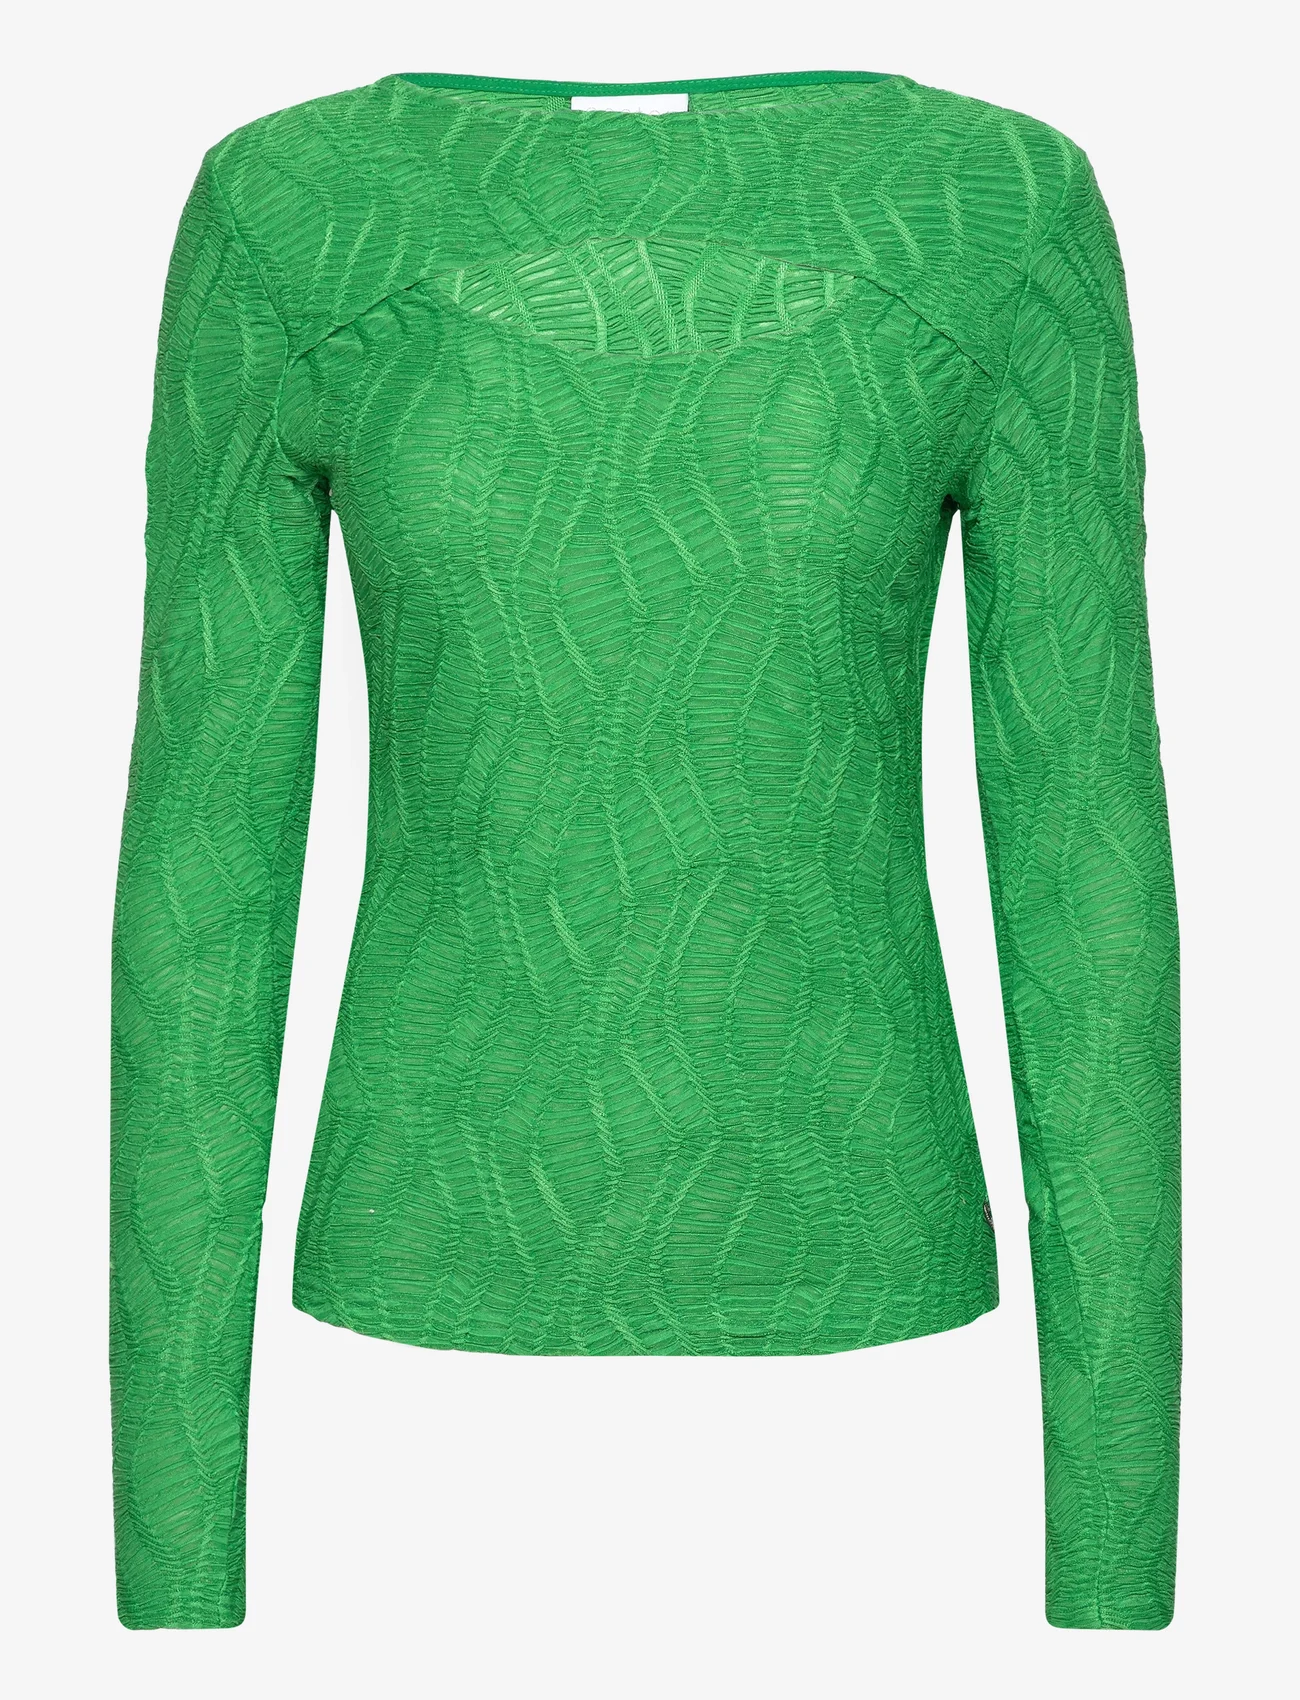 Coster Copenhagen - Long sleeve t-shirt with structure - long-sleeved tops - leaf green - 0